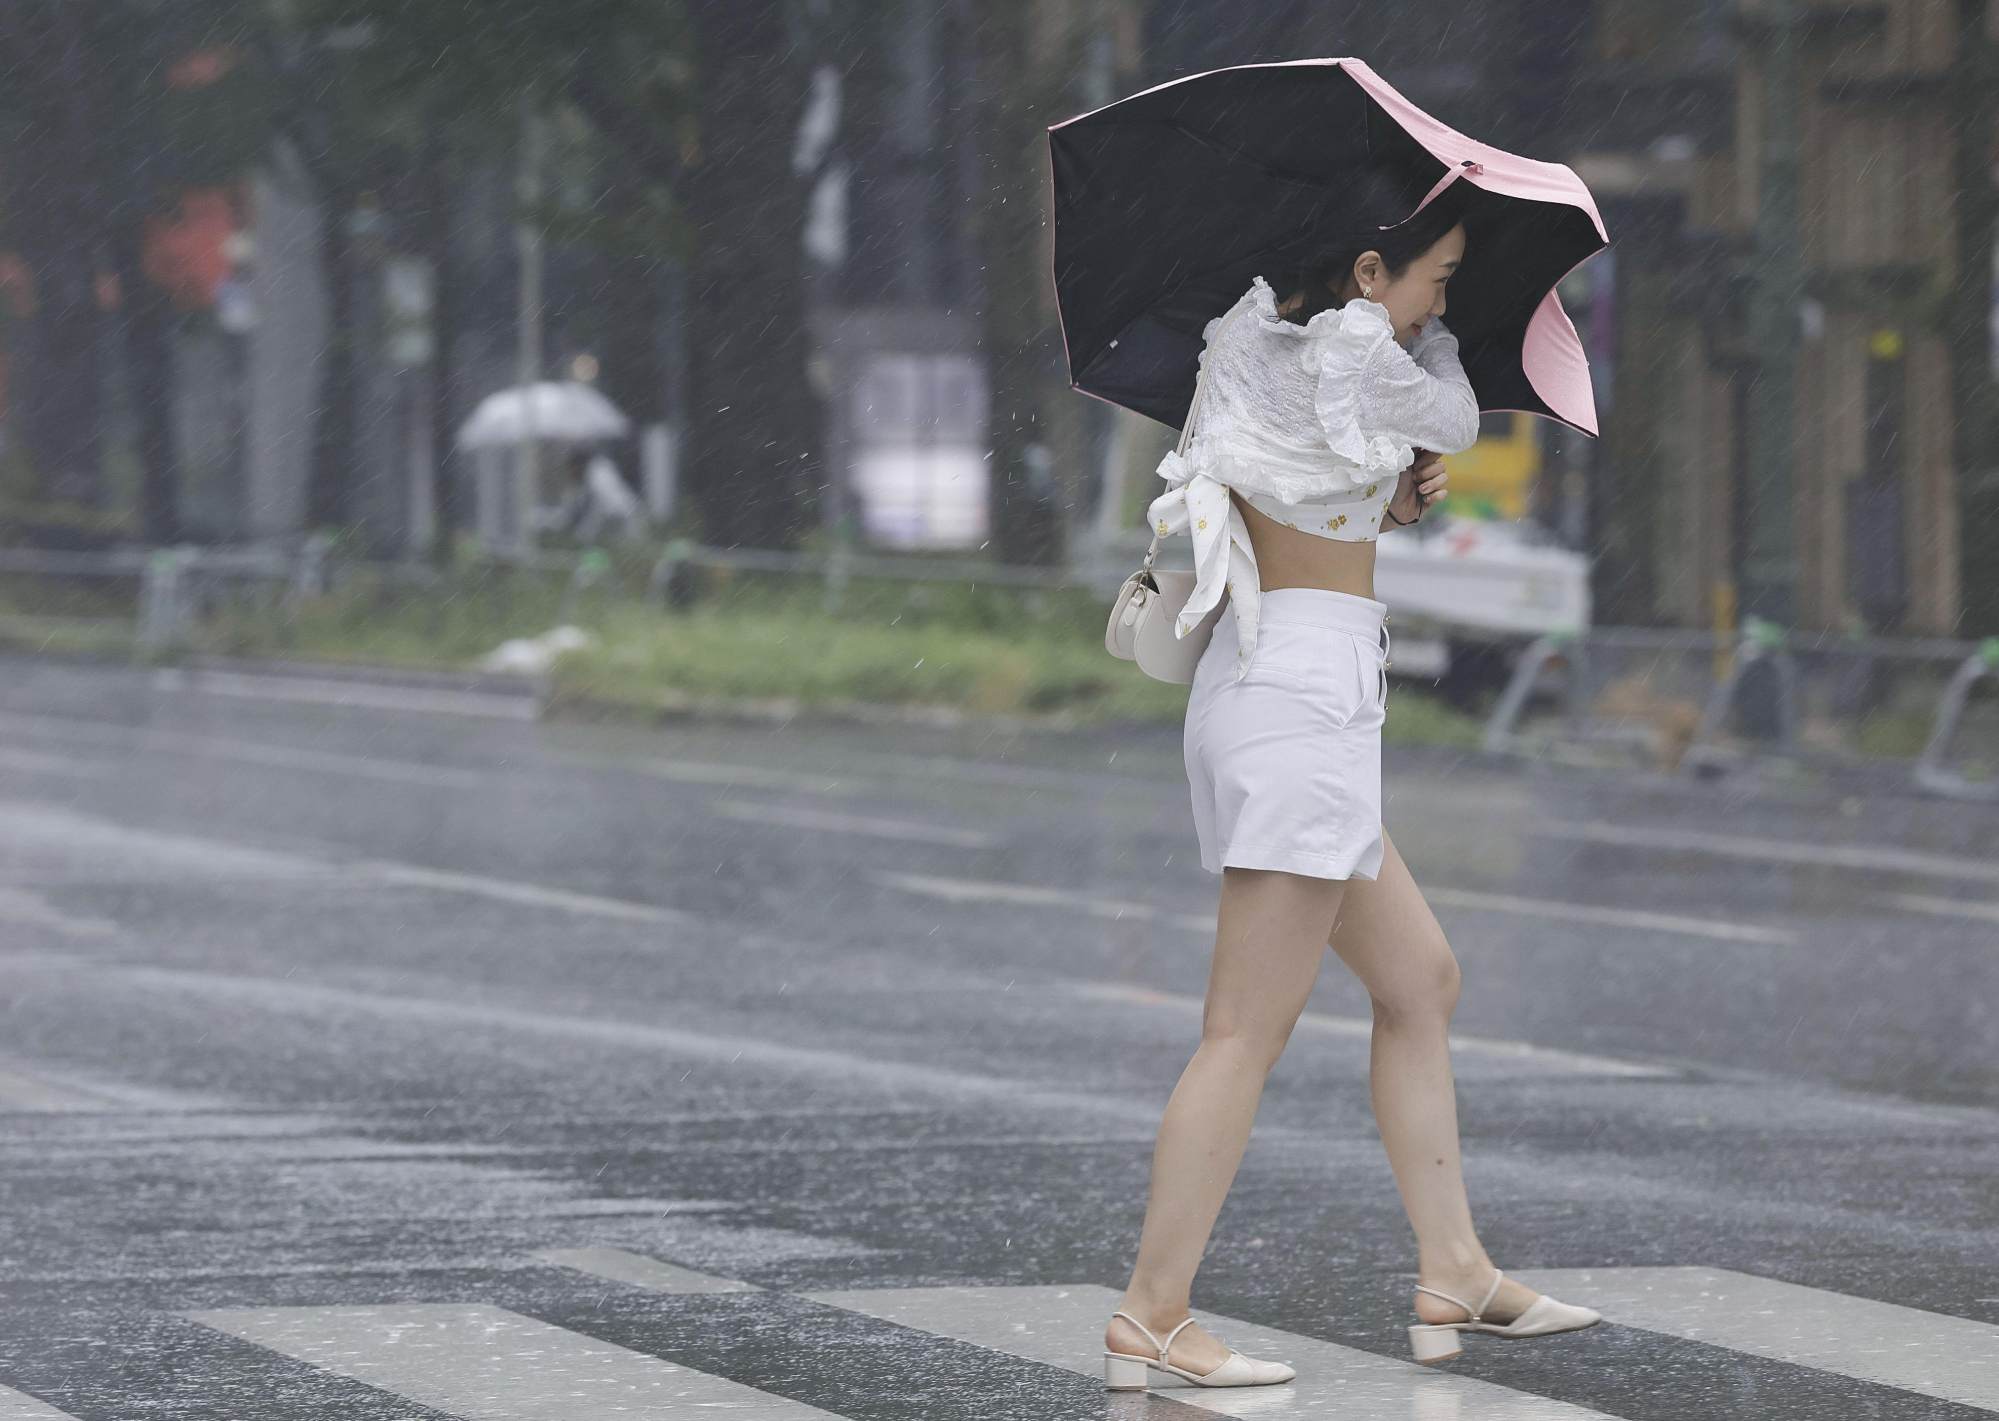 A woman braves a downpour and strong wind in Osaka on Tuesday as Typhoon Lan hits the region. Photo: Kyodo